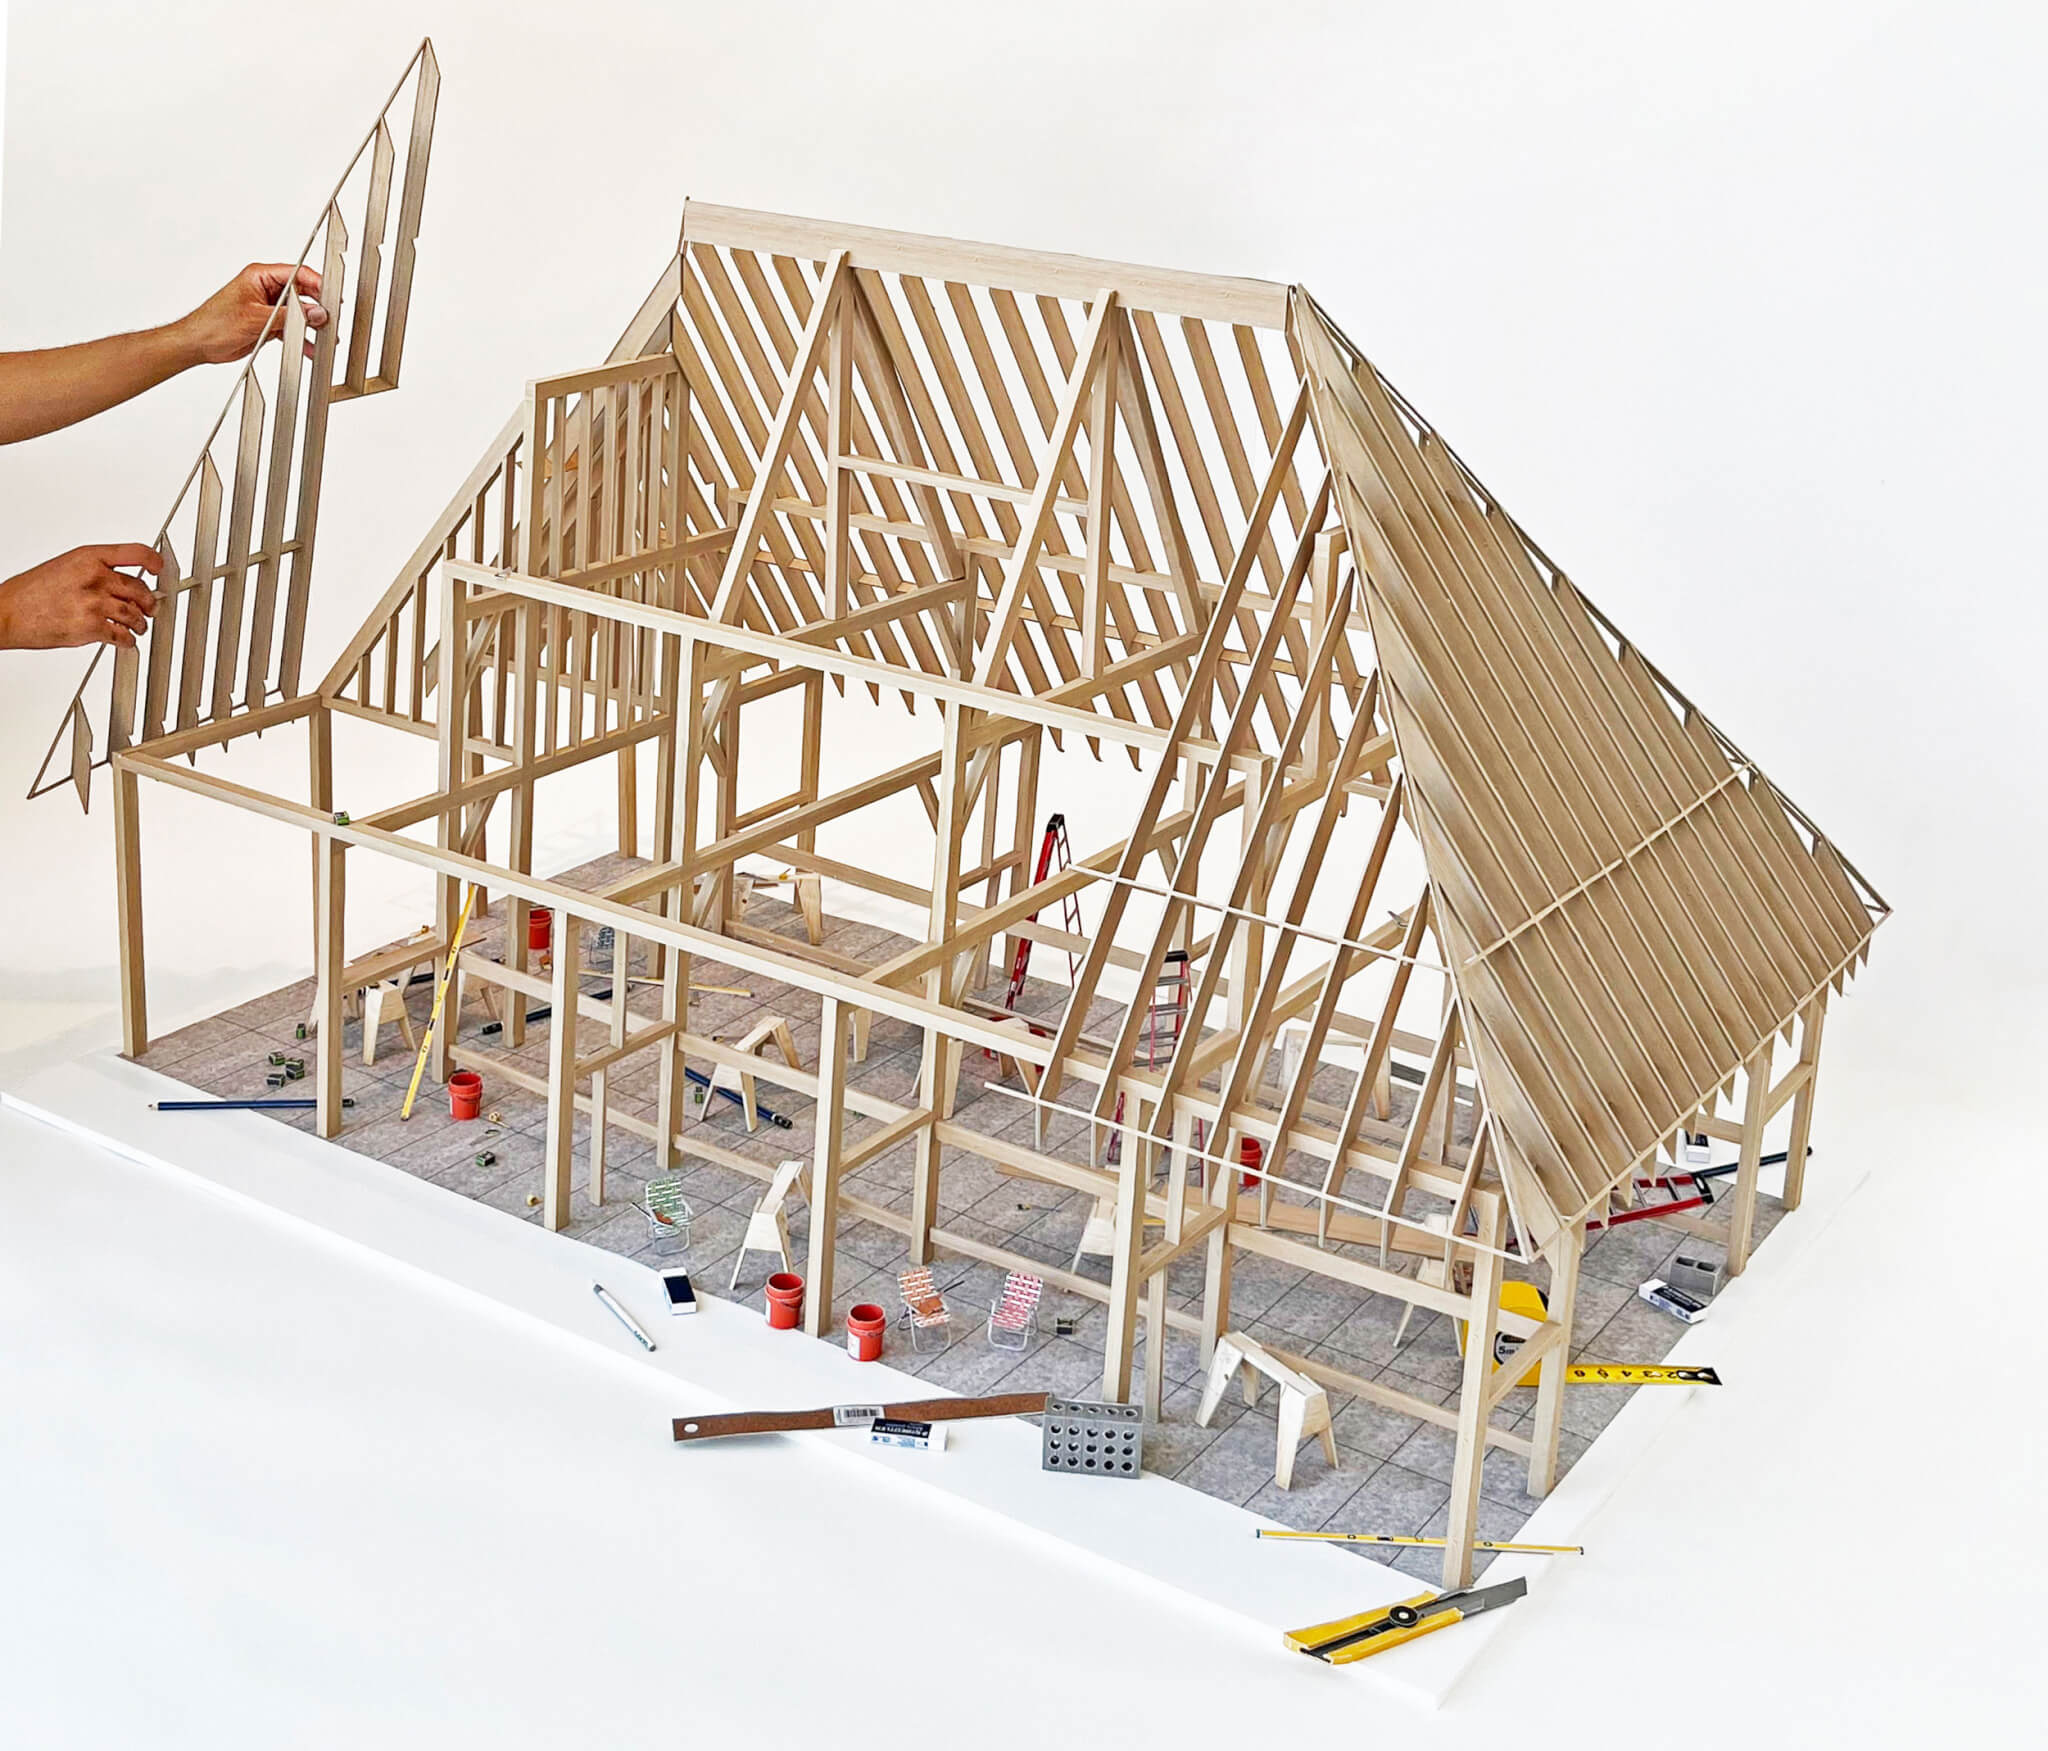 Cooper Union stages exhibition on architectural models, and more